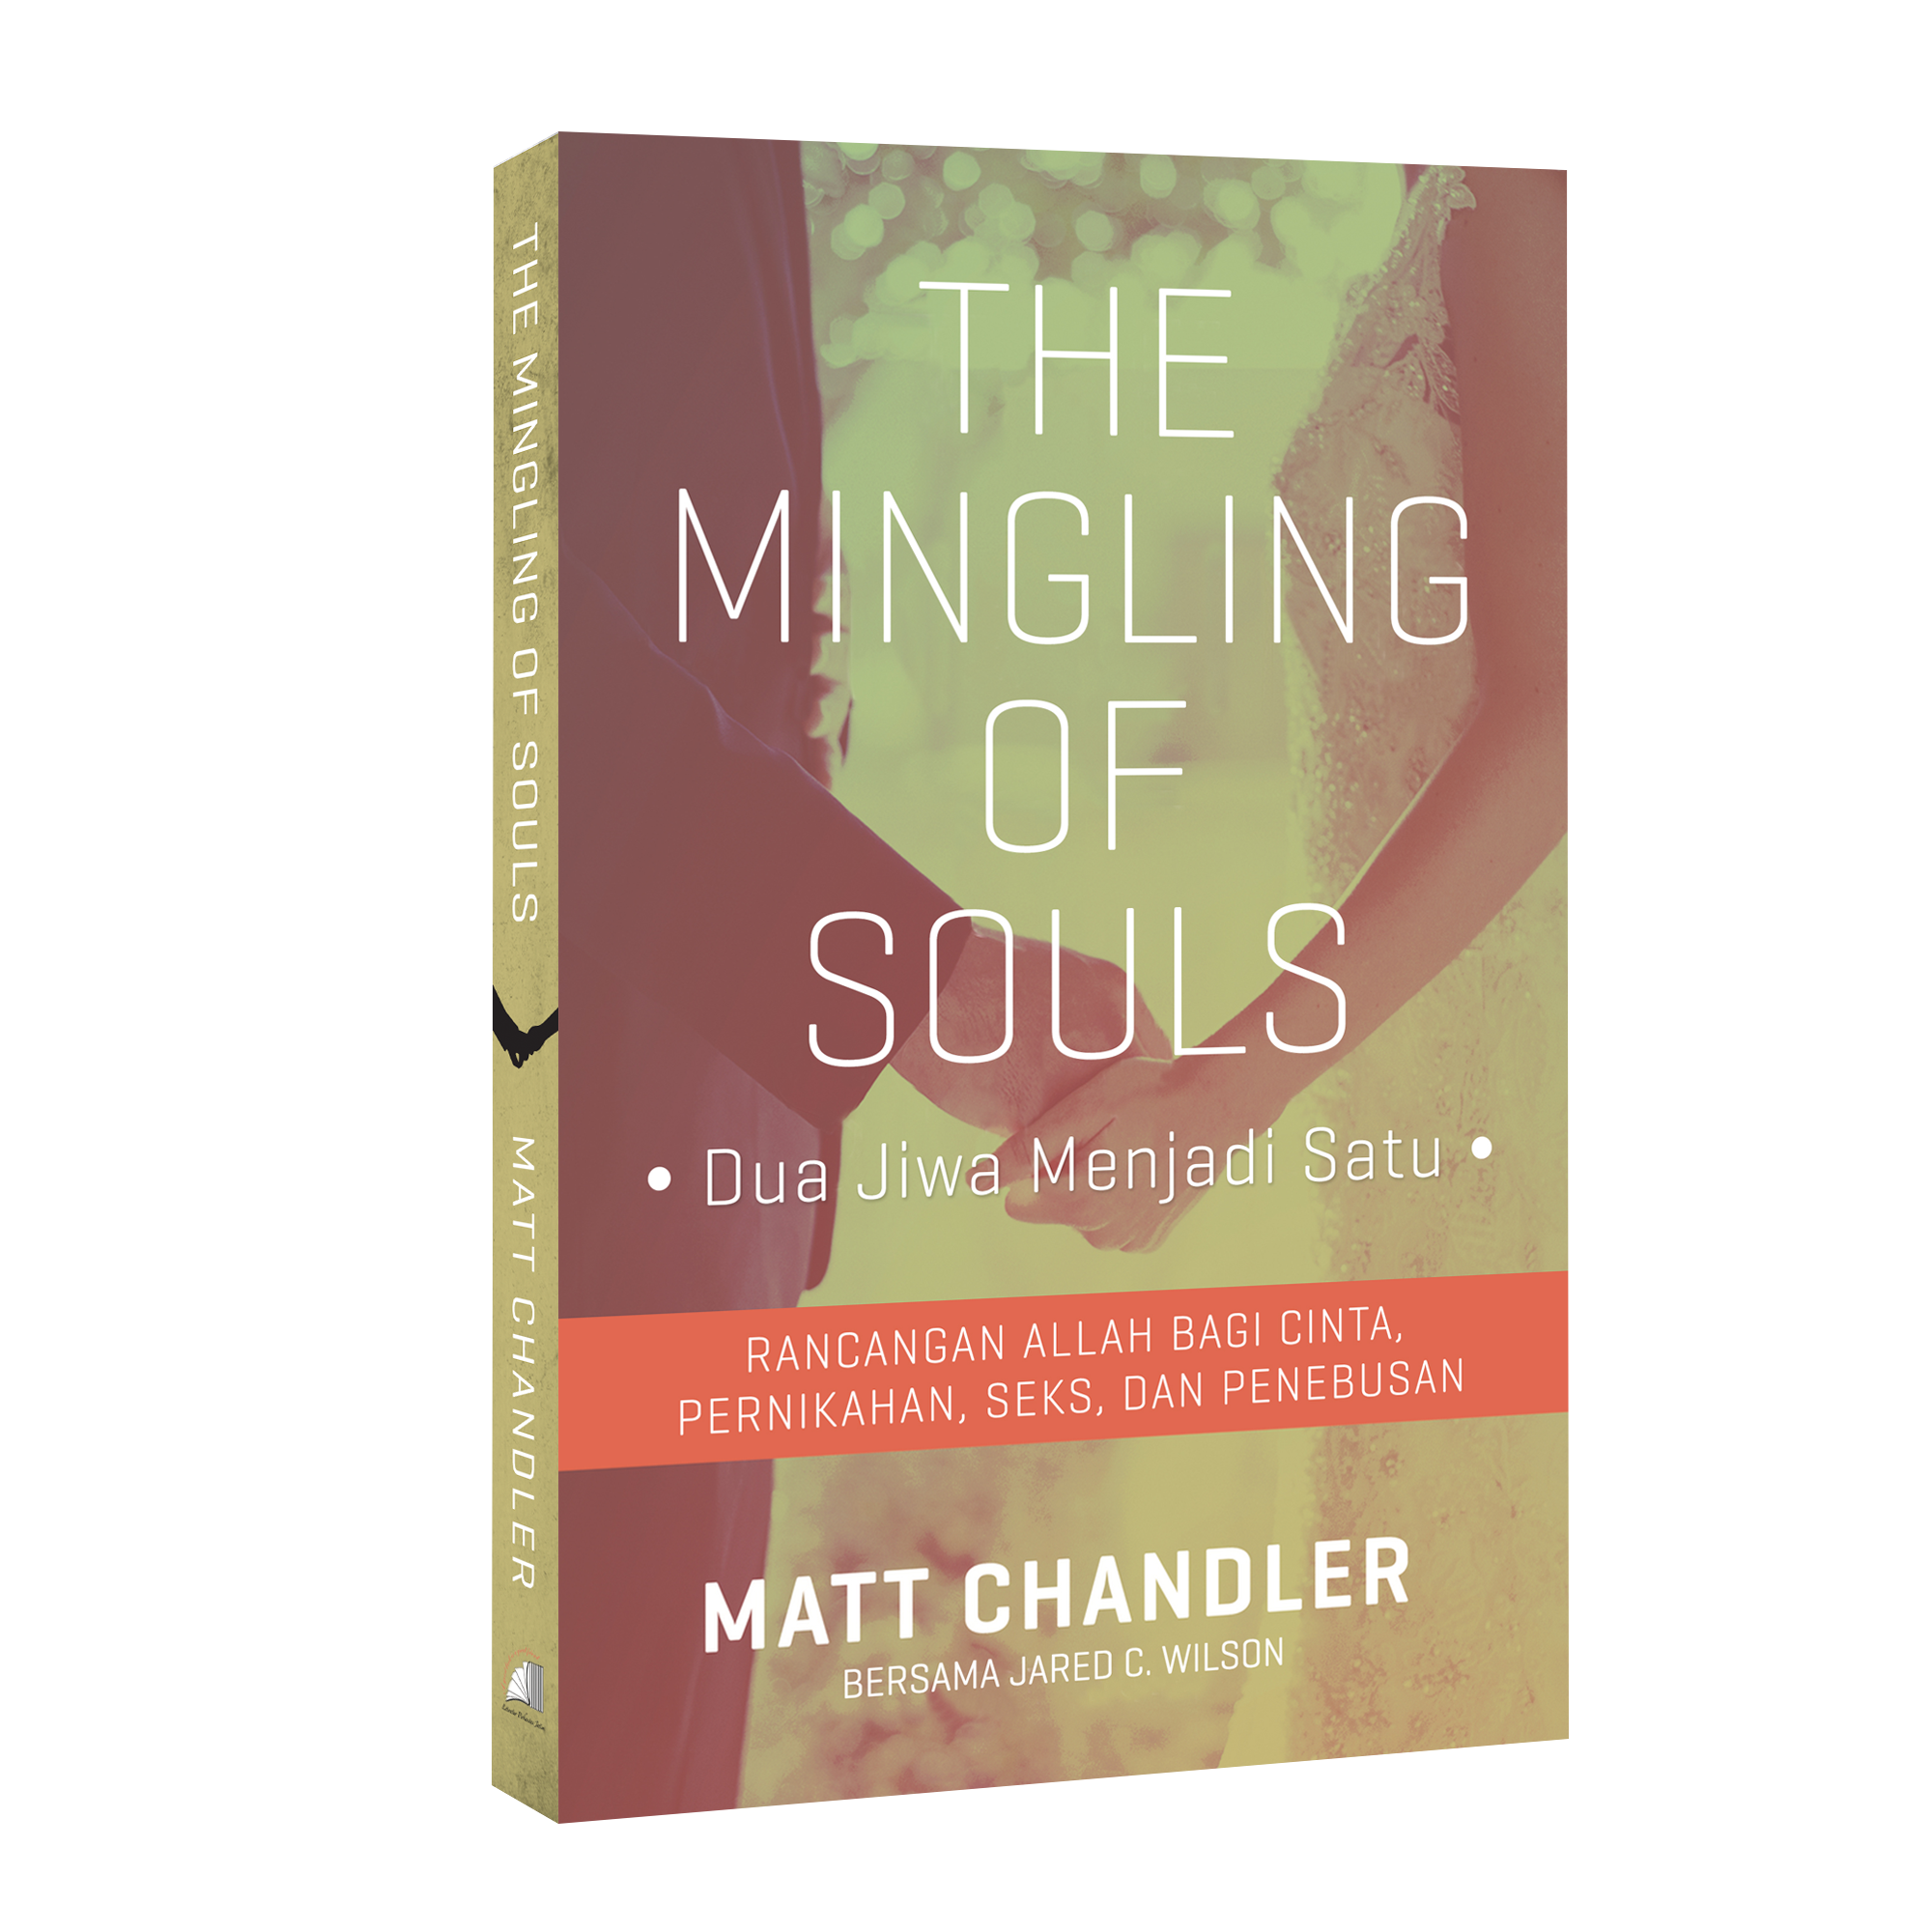 The Mingling of Soul